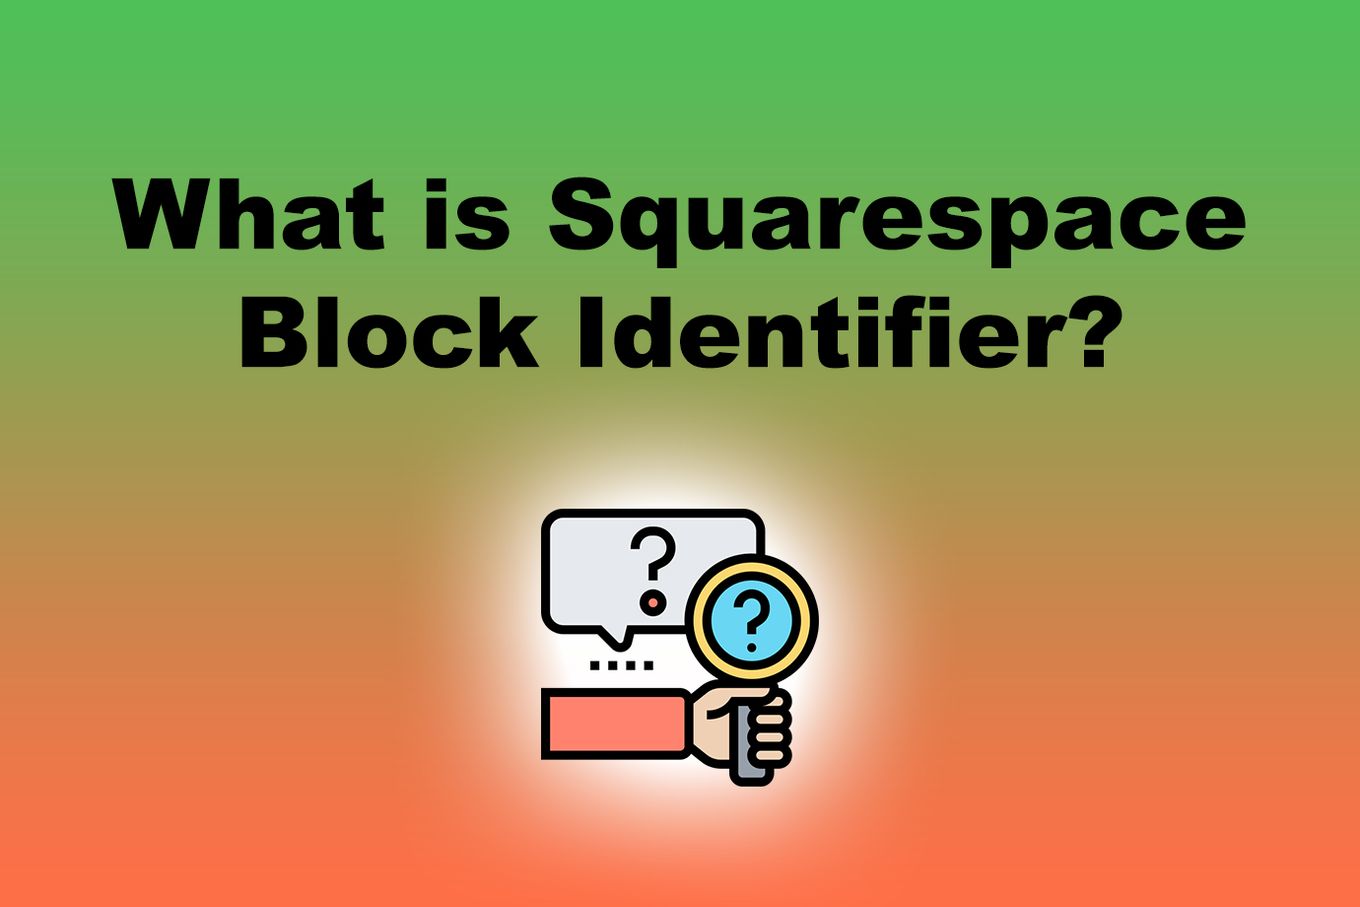 What is a squarespace block identifier